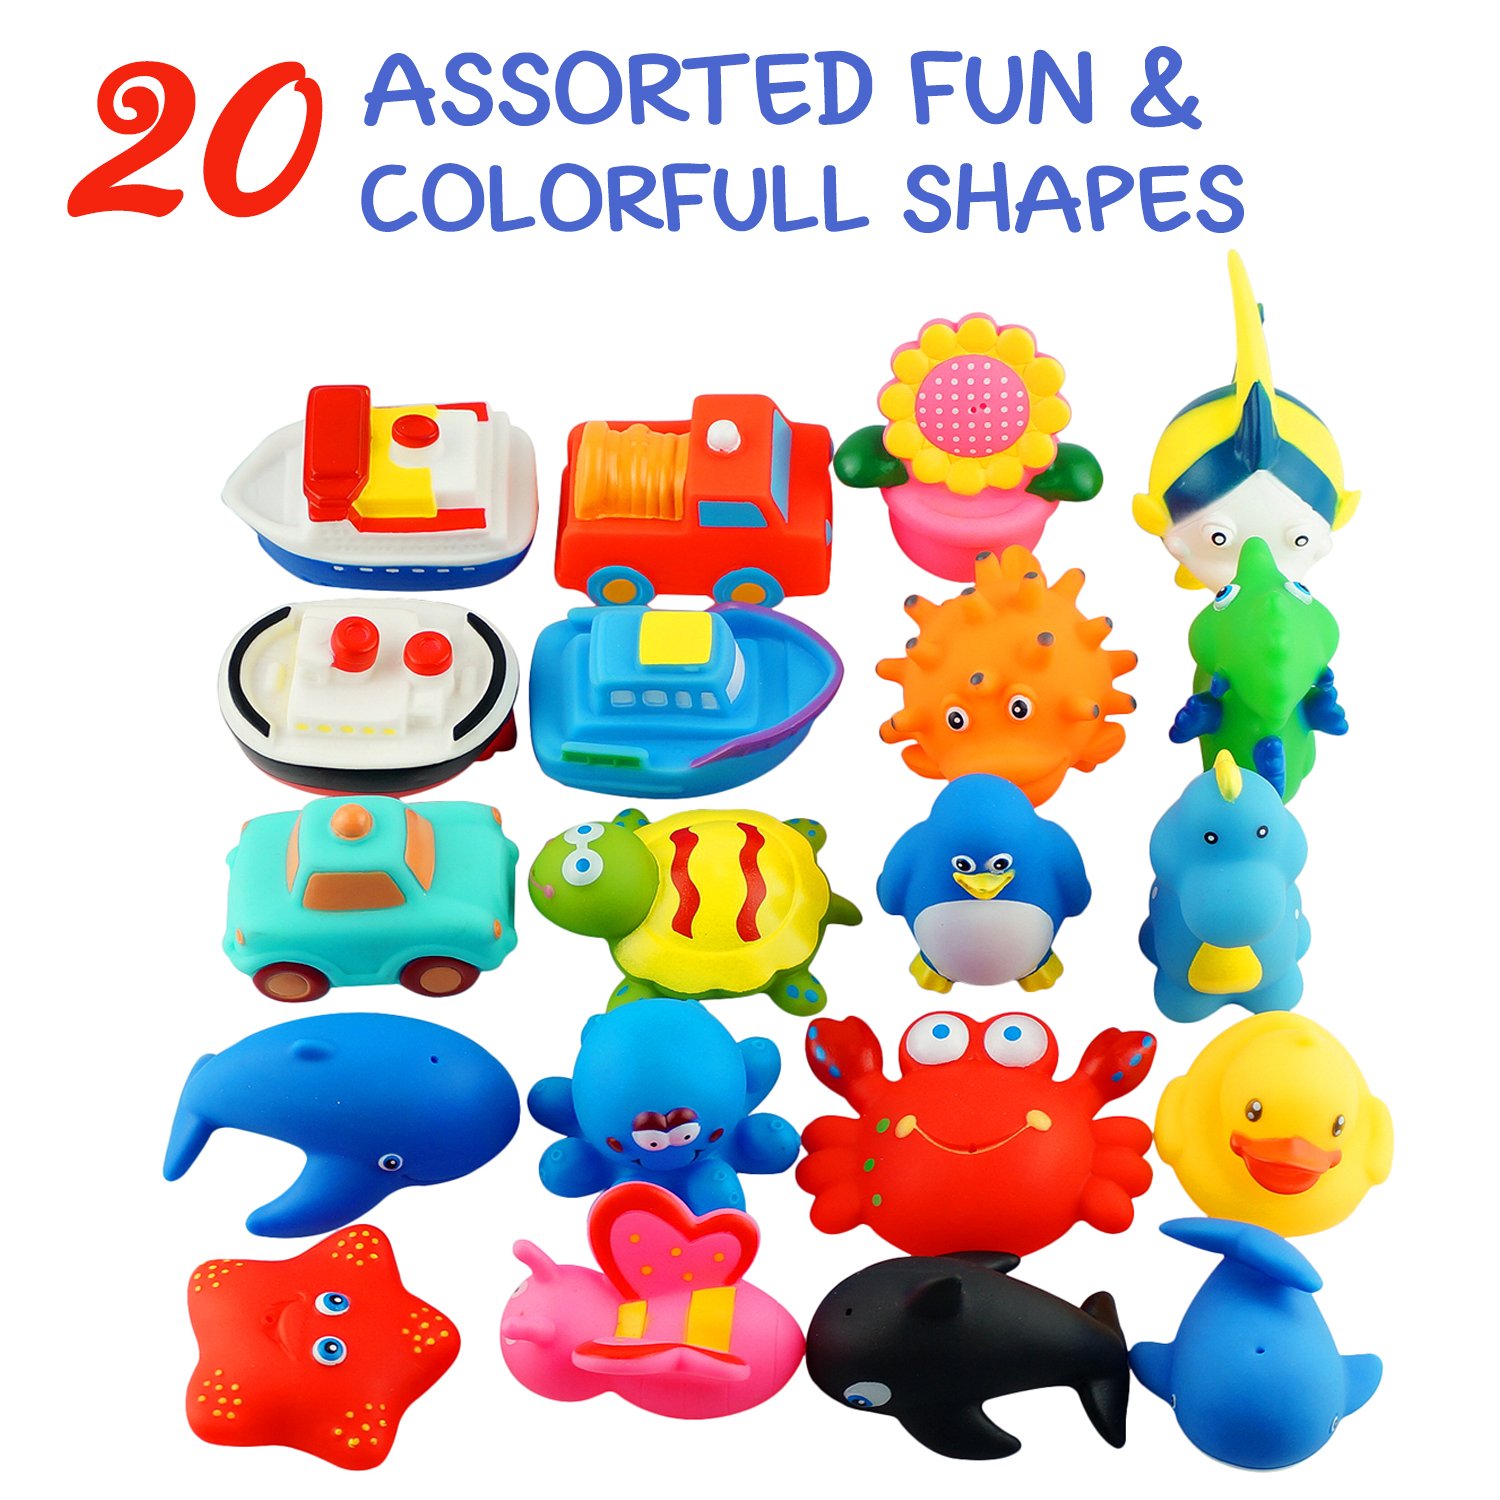 Dimple Set Of 20 Floating Bath Toys With 20 Different Sea Animals, Vehicles & Shapes, Squirter Toys For Kids, Squeeze To Spray!